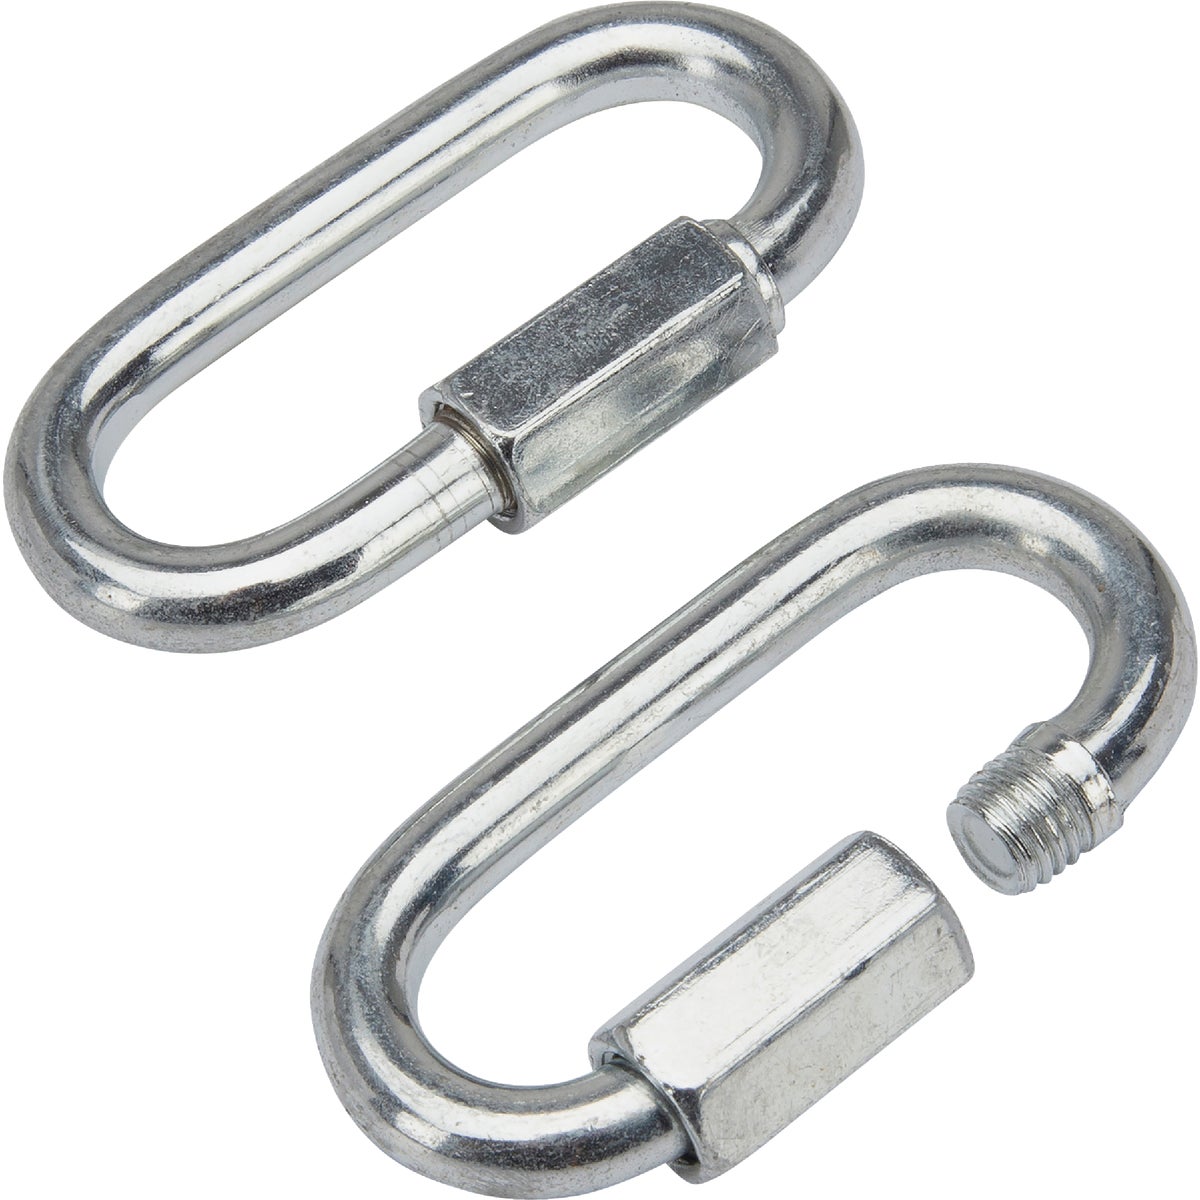 Item 579475, The TowSmart Quick Links are designed to be used with towing safety chains 